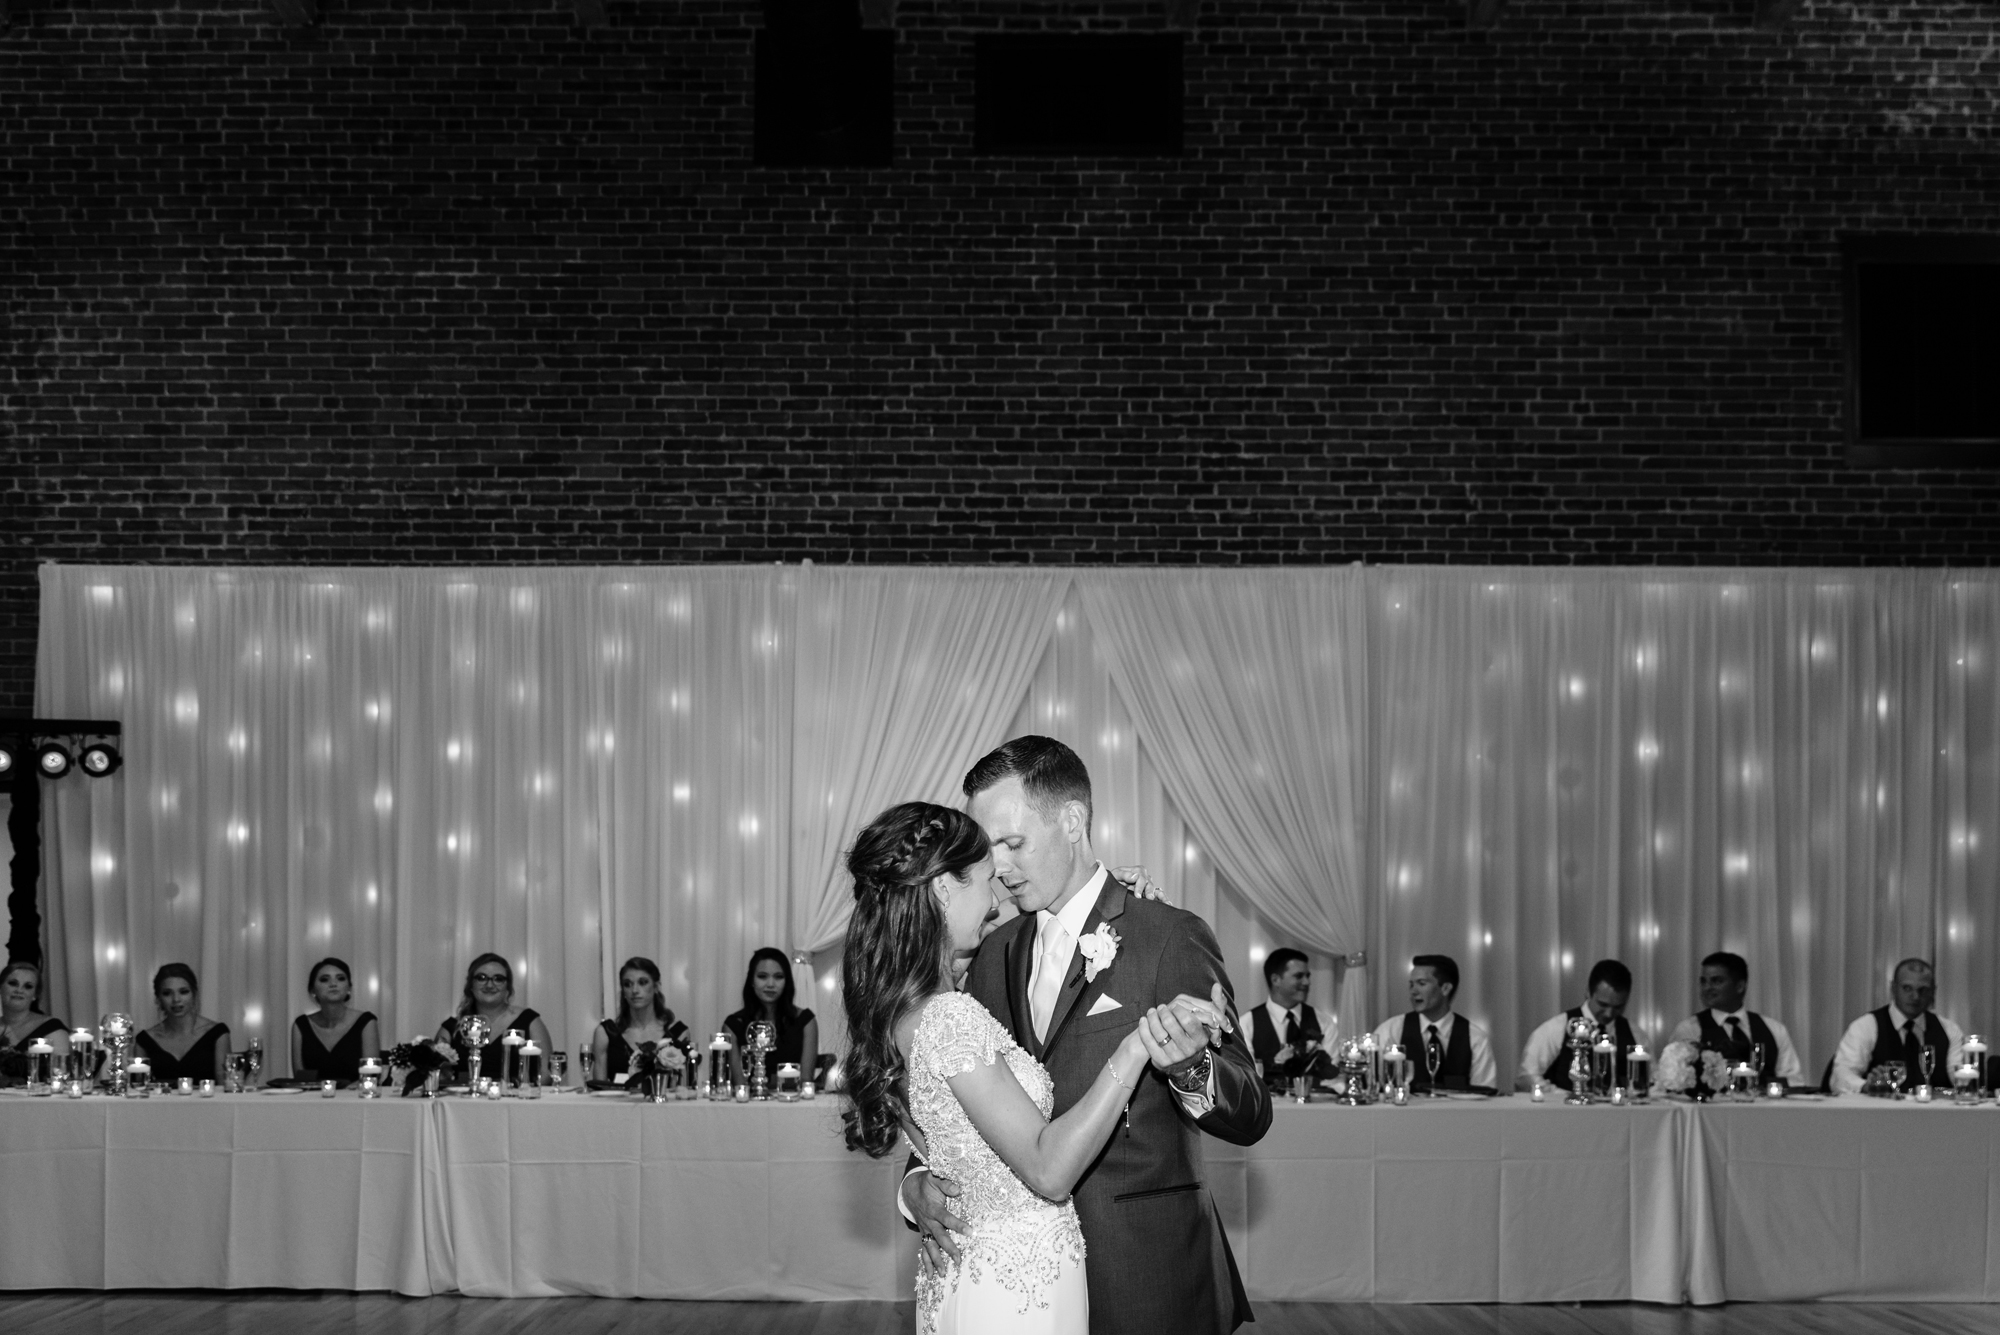 Bride & Groom’s first dance at a Wedding Reception at the Armory